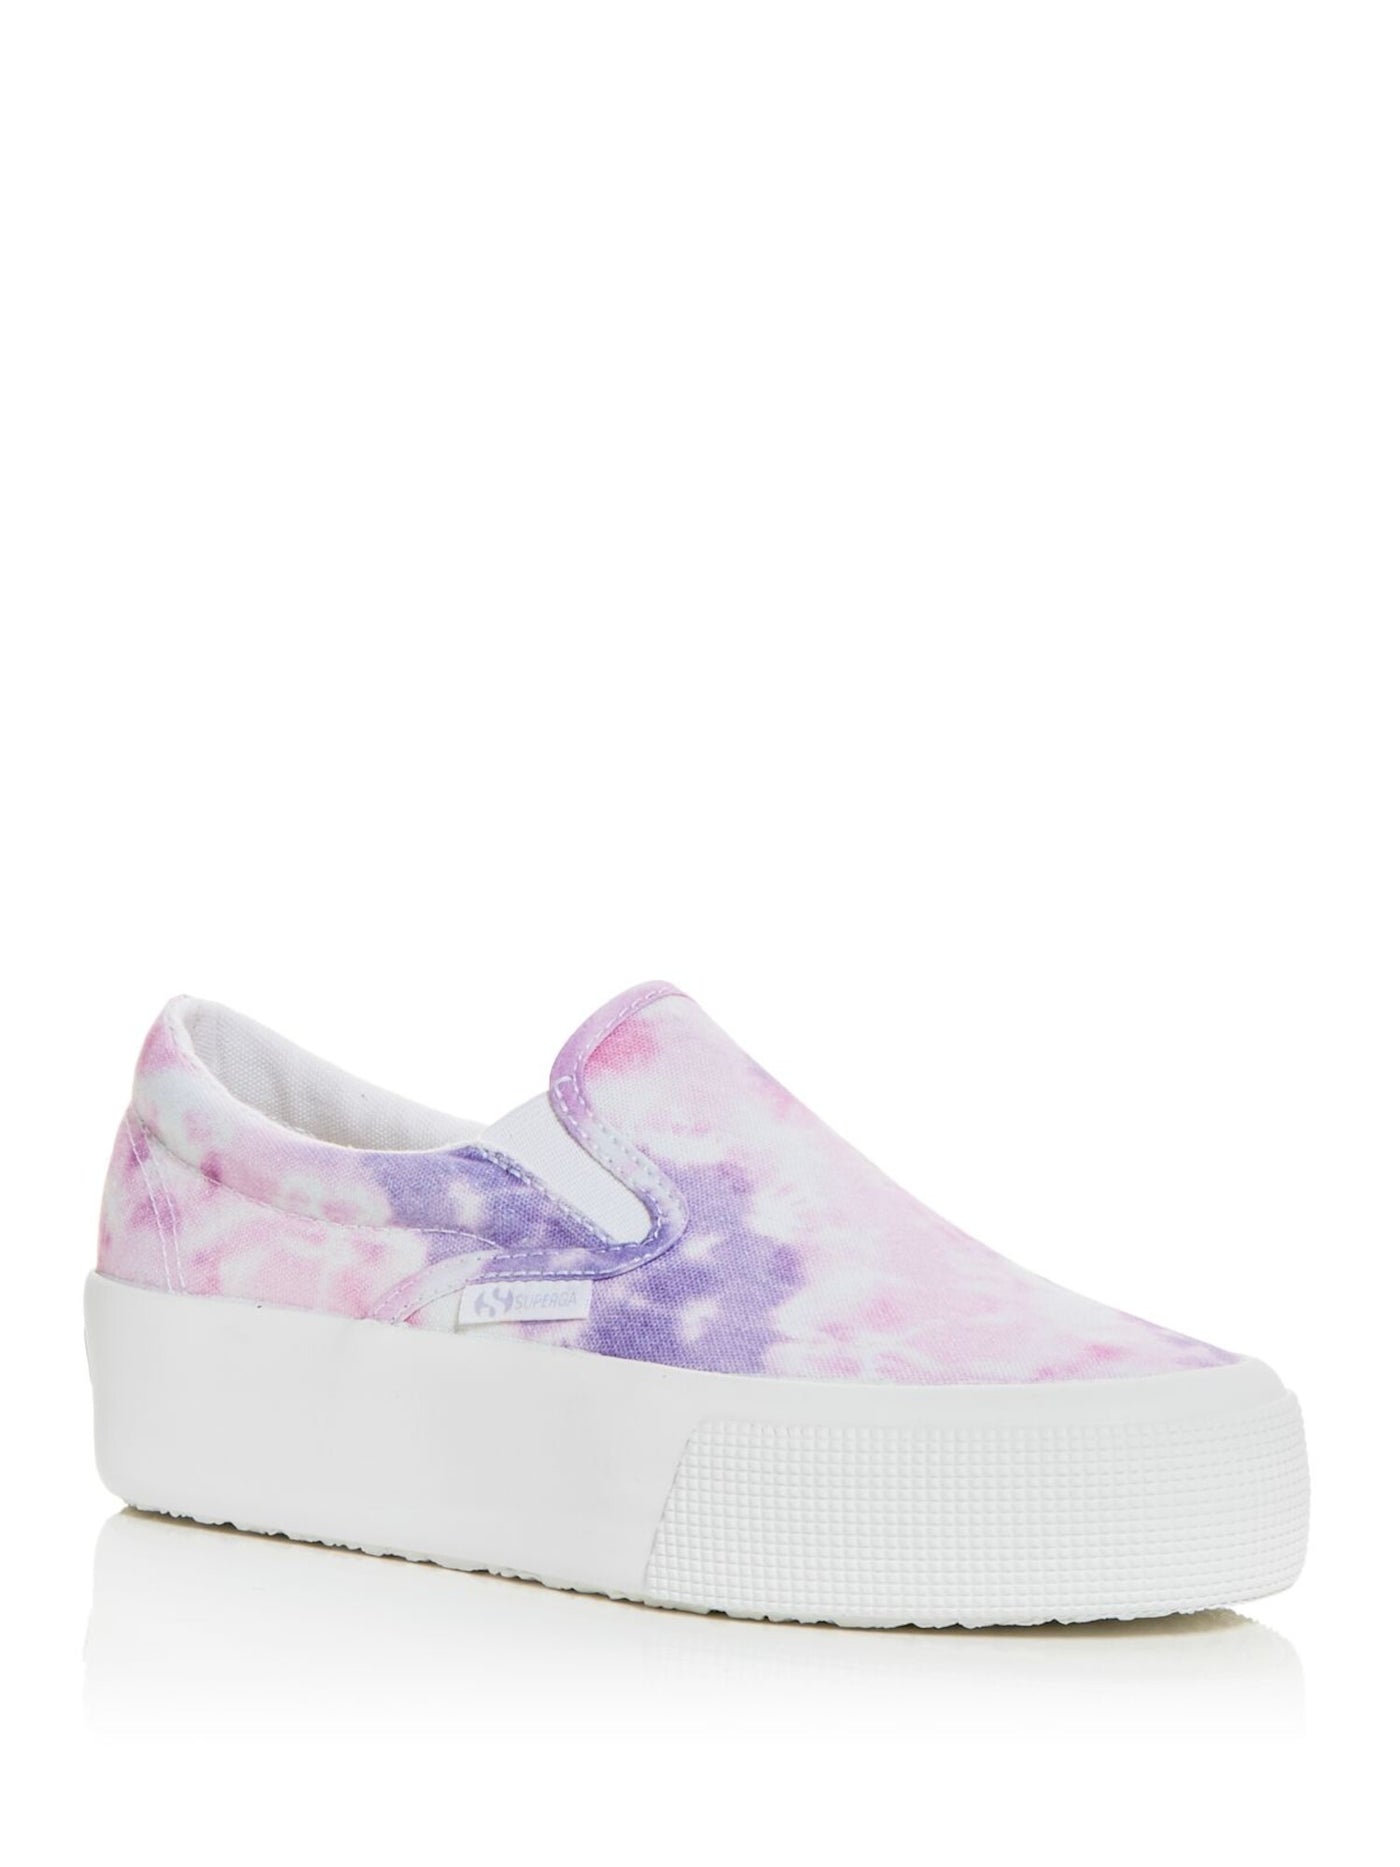 SUPERGA Womens Pink Tie Dye Cushioned Breathable Tie Dye Round Toe Platform Slip On Athletic Sneakers Shoes 39